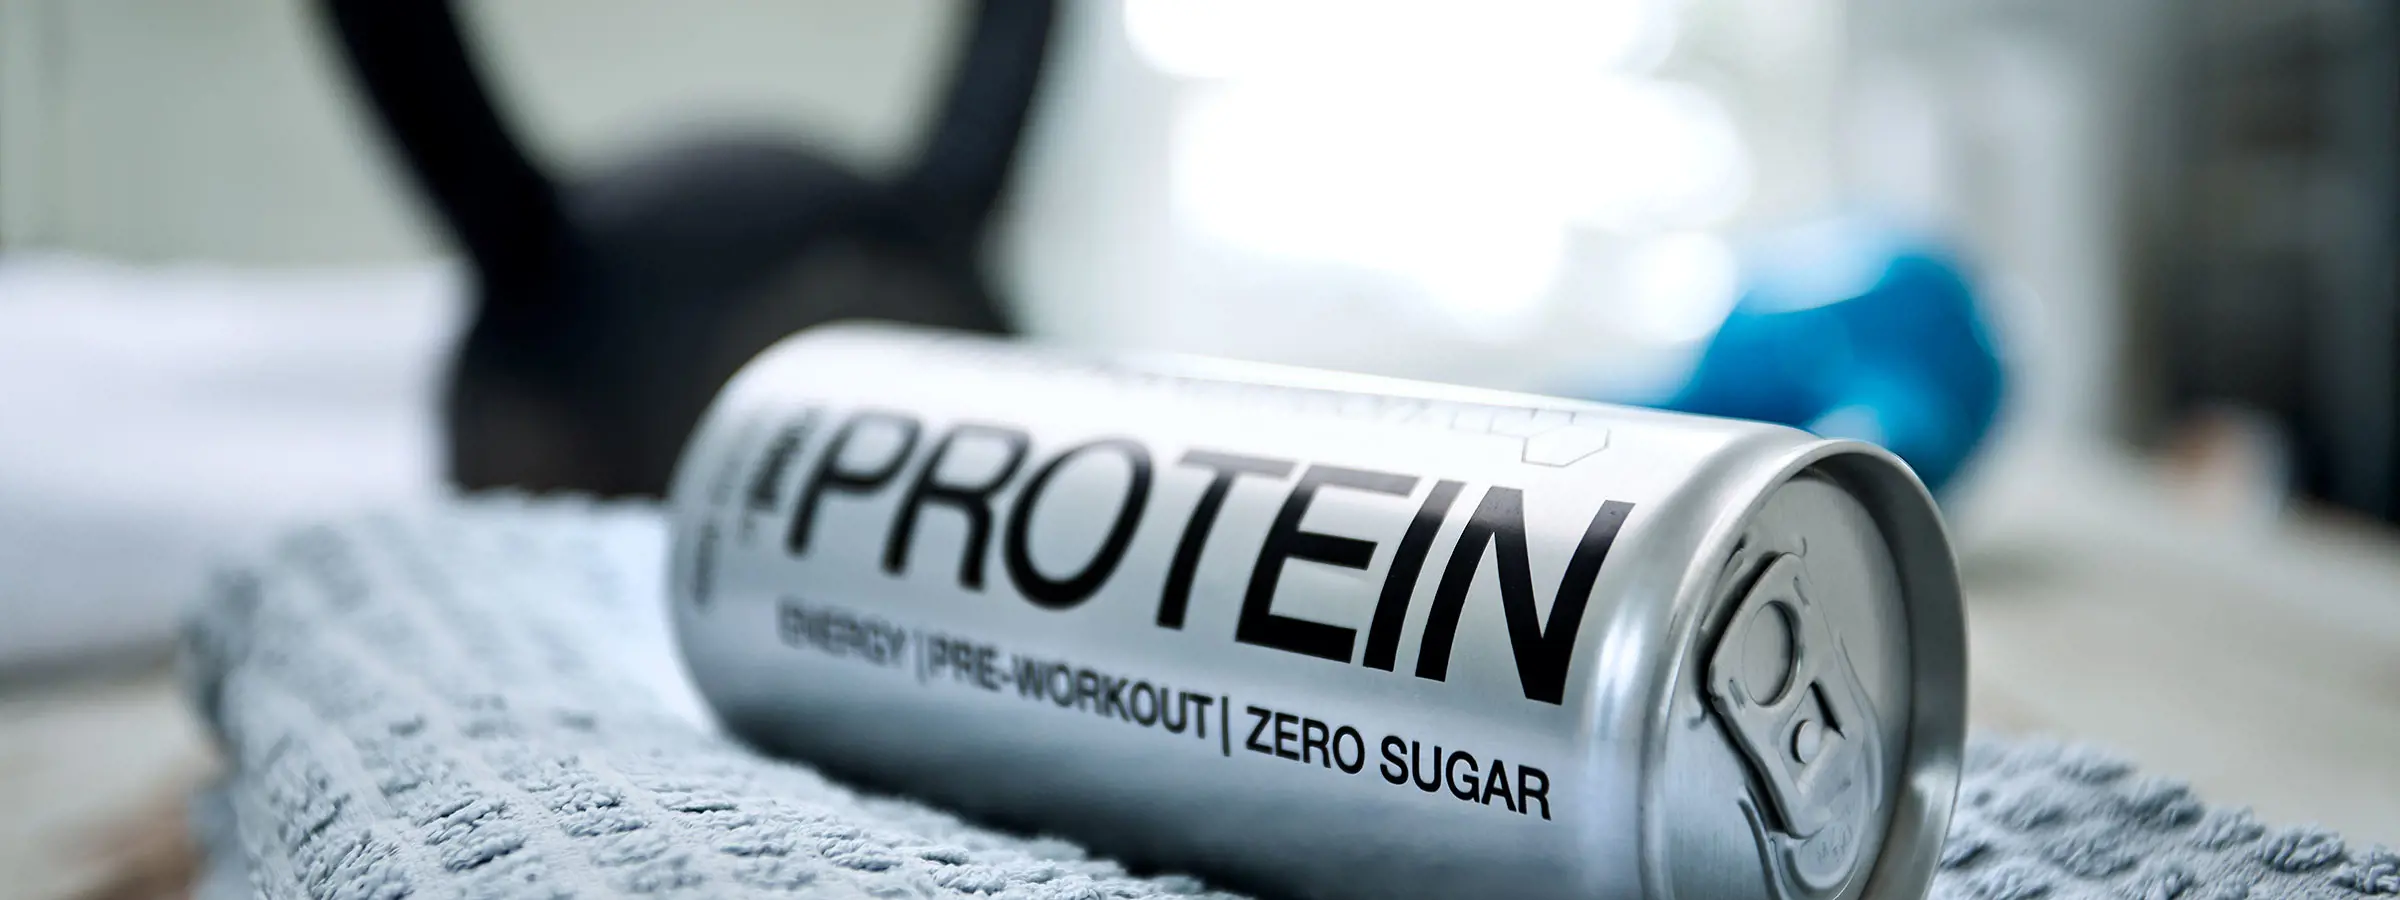 Whey protein in a sparkling format